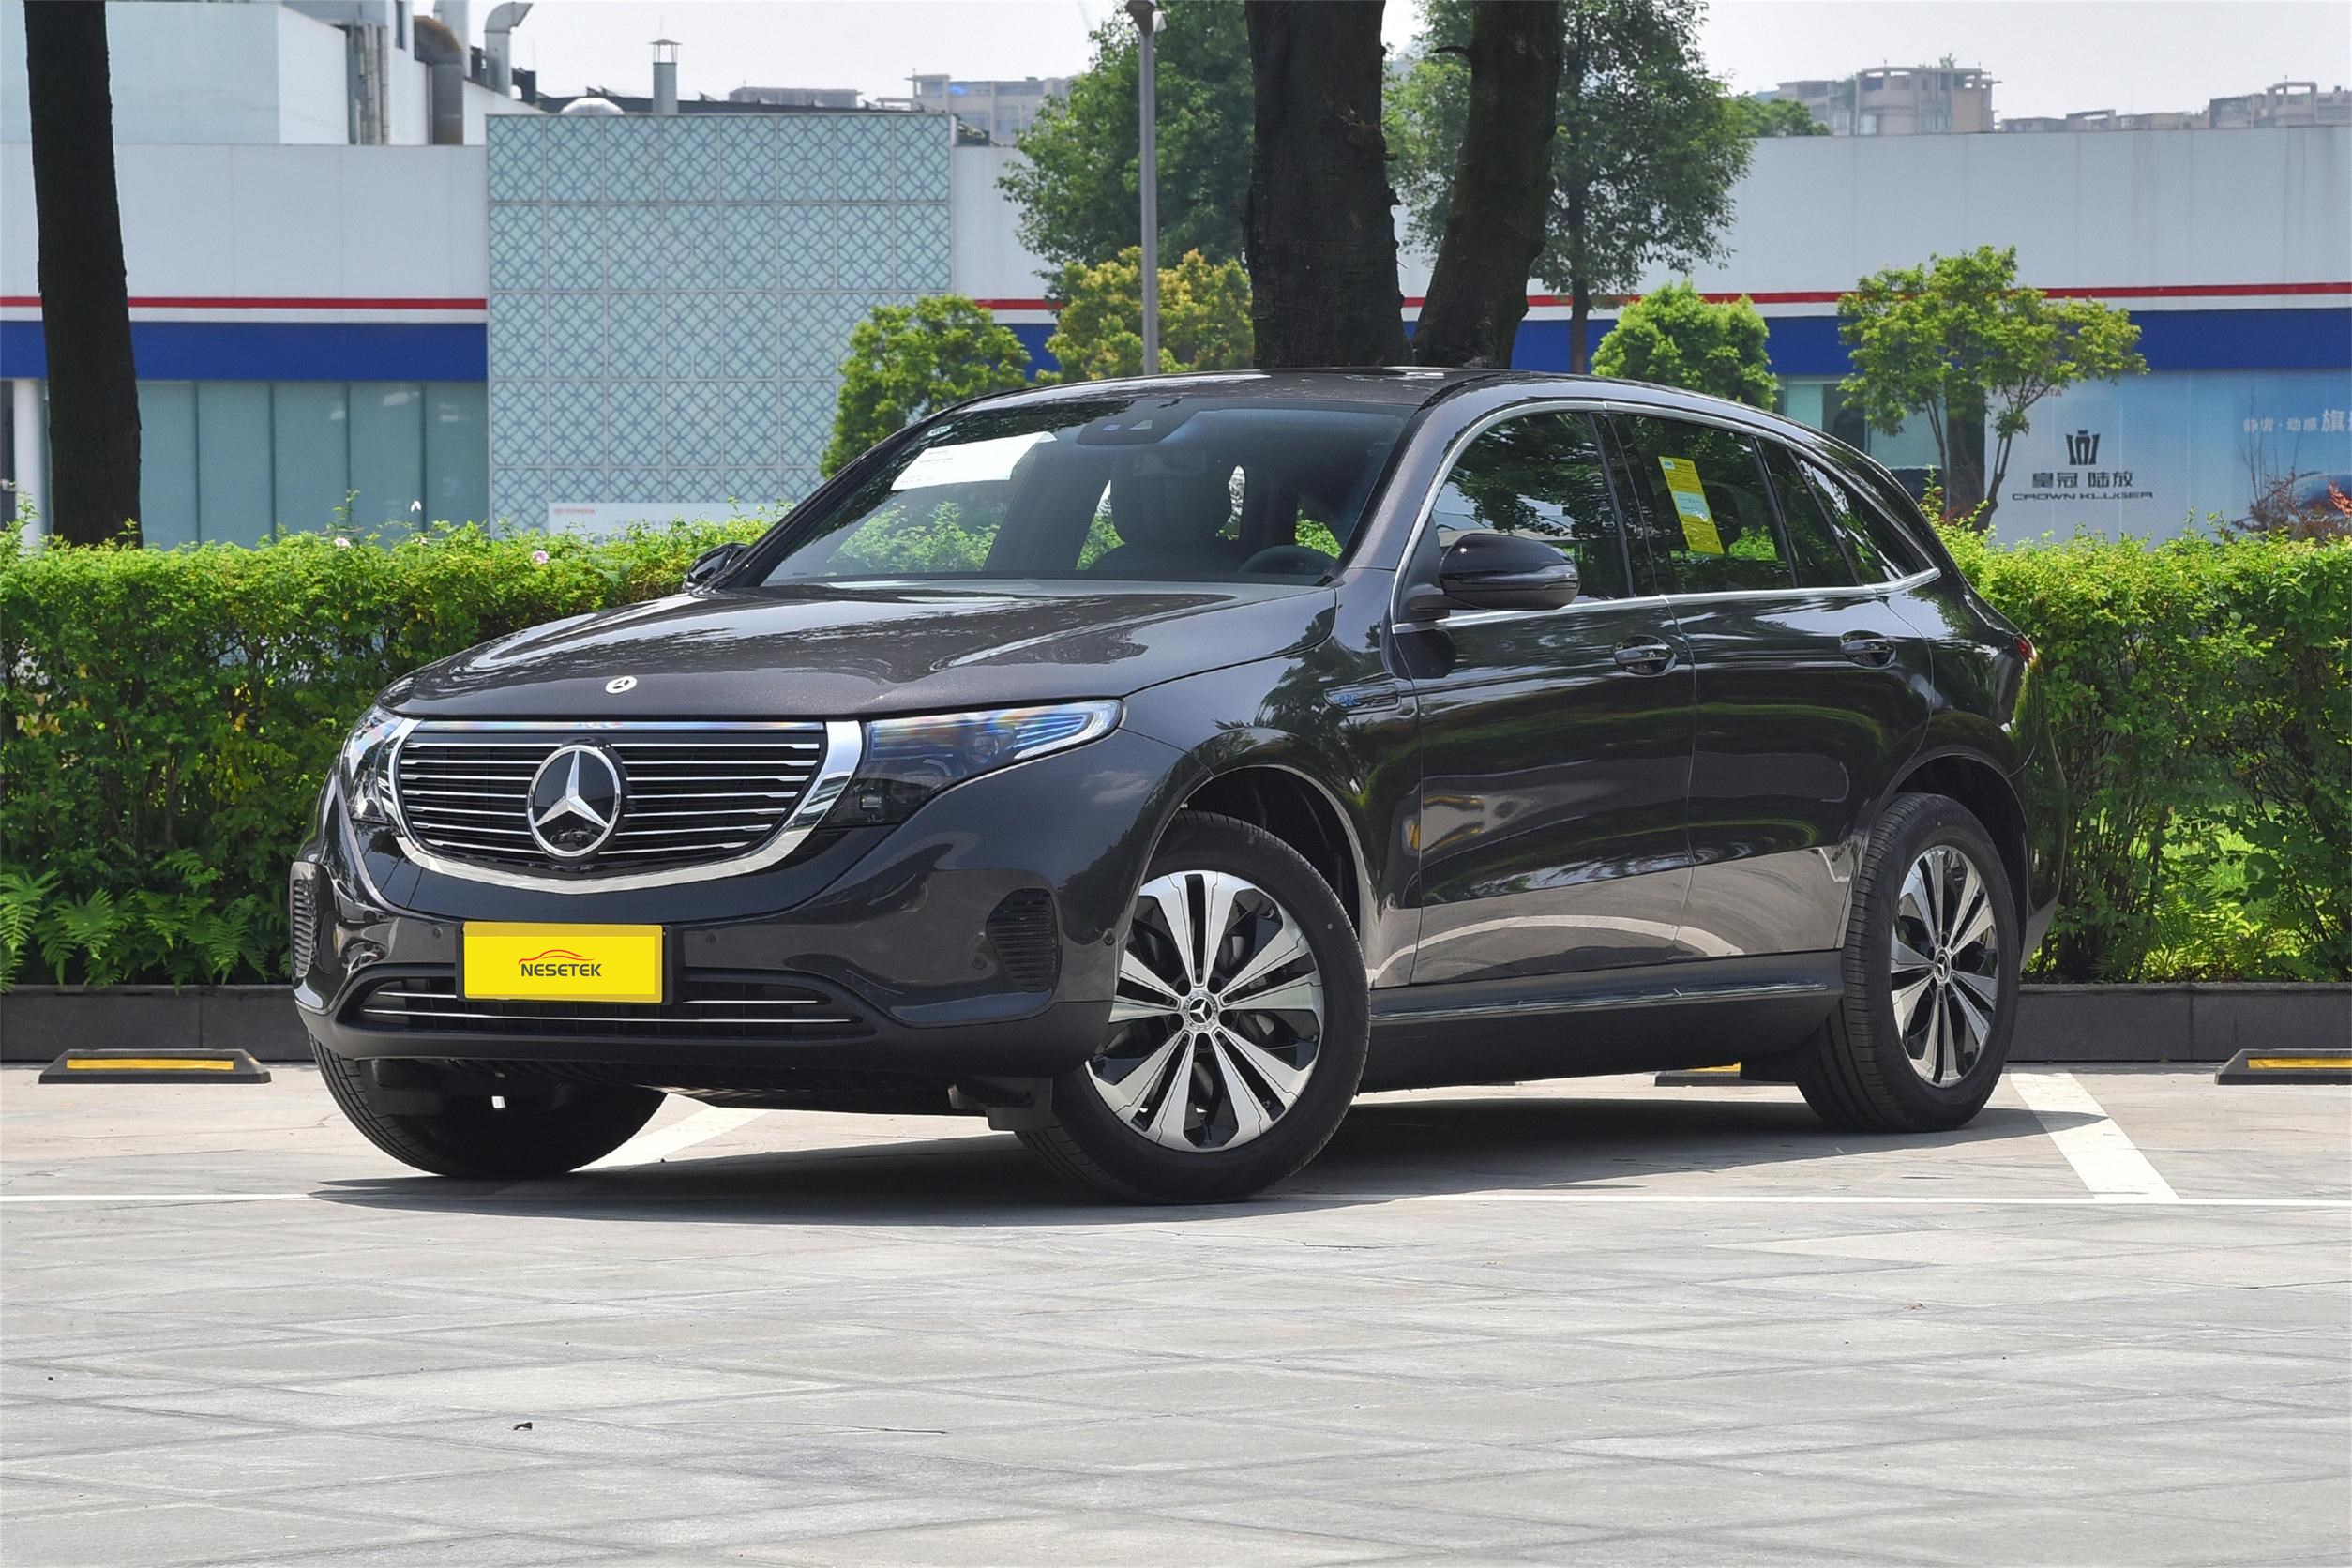 Mercedes Benz EQC 350 400 EV AWD 4WD Electric Luxury SUV Buy New Energy Vehicle Cheaper Price China